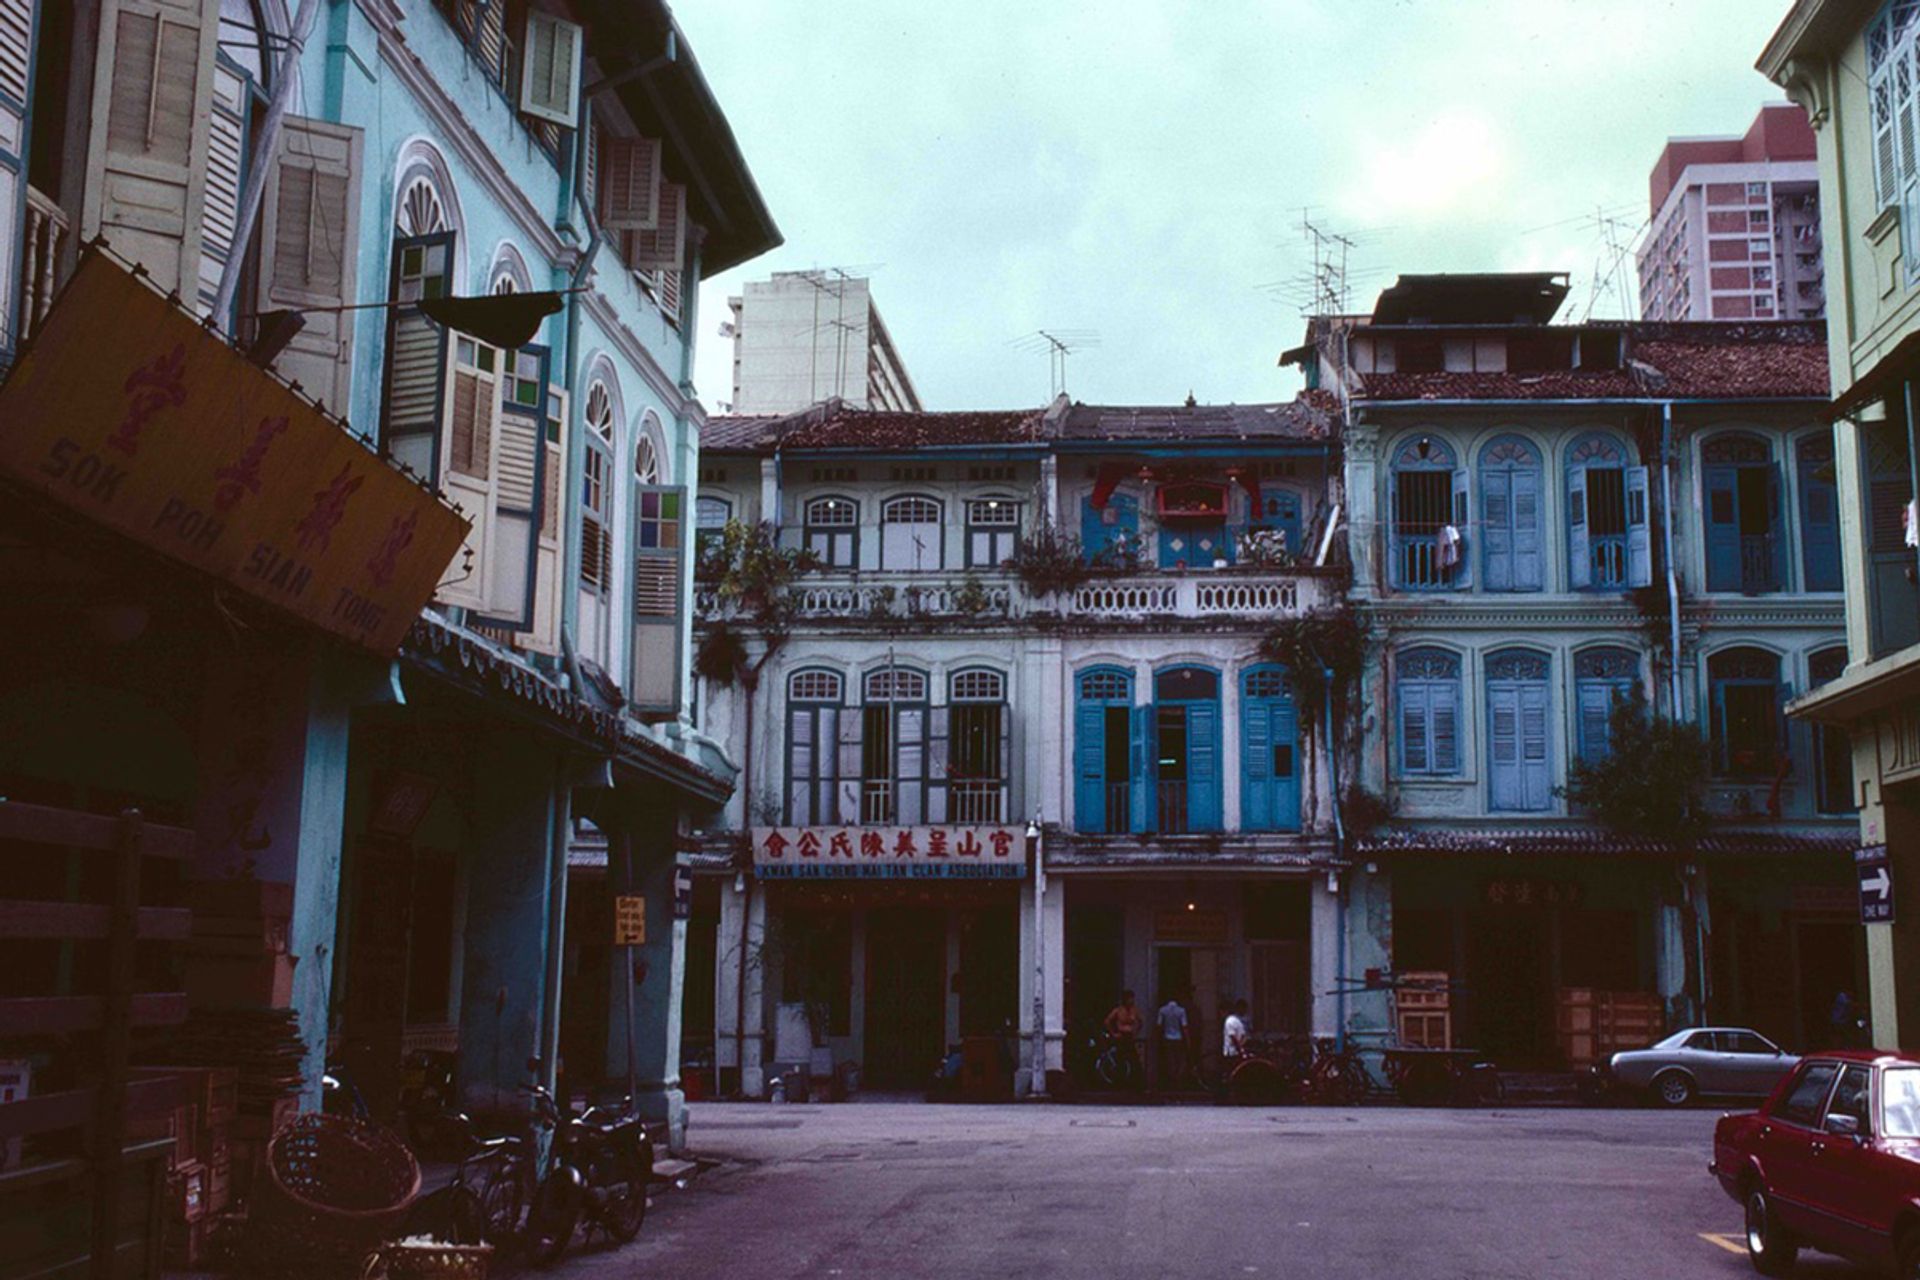 Photographed in the 1970s, these types of shophouses were built between the 1840s and the 1950s, with each generation topping the previous one in height and architectural style. Some of the tallest ones which are four or five storeys can be seen at Boat Quay, sitting alongside simpler two-storey shophouses.